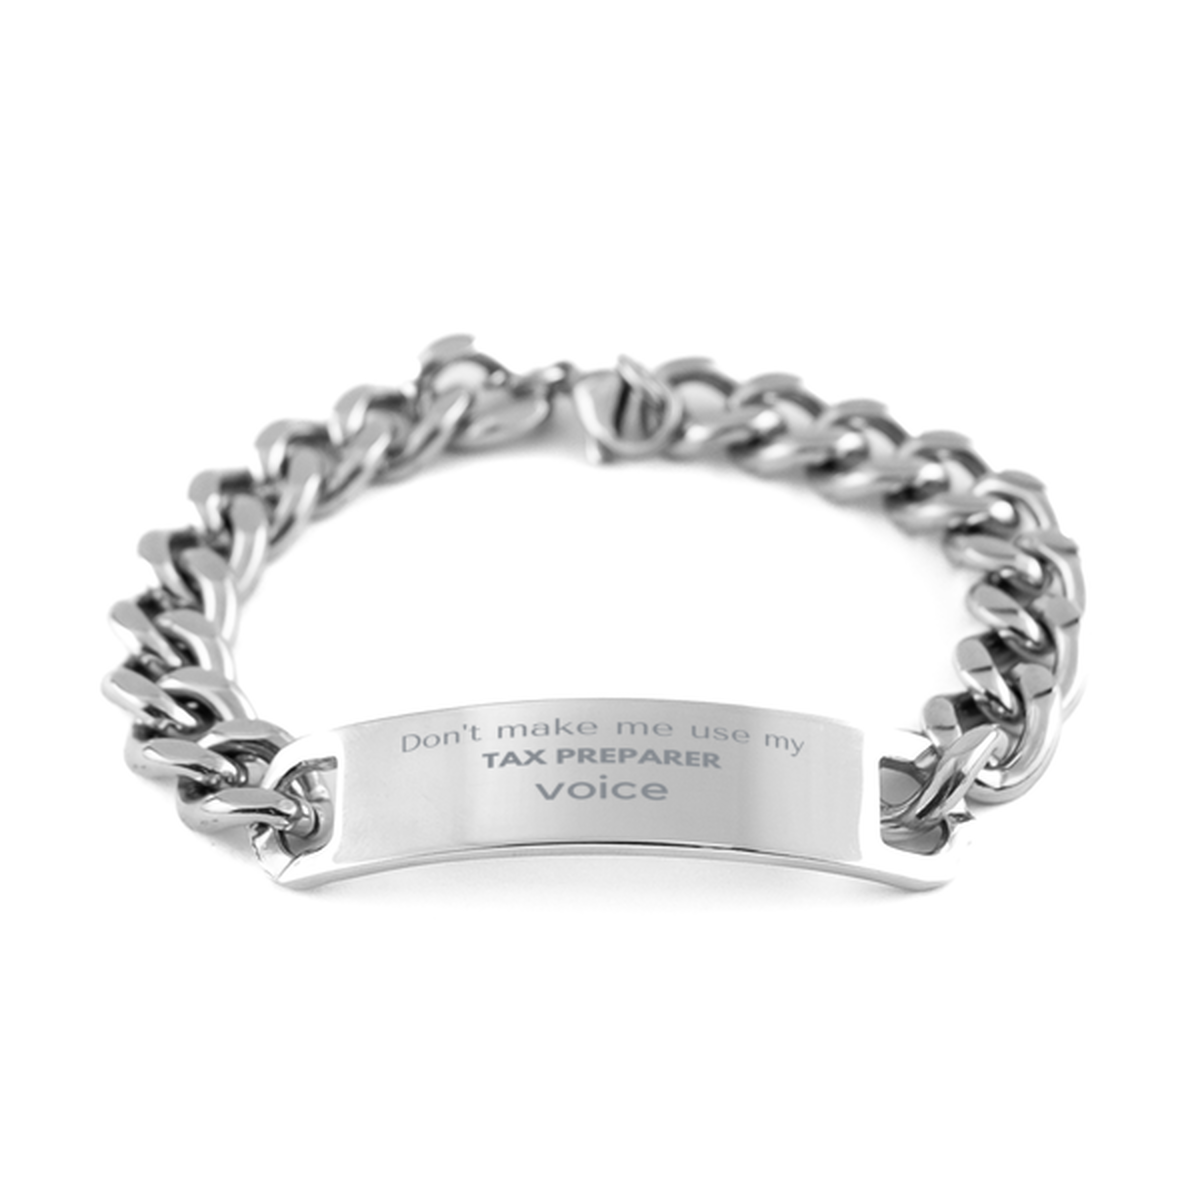 Don't make me use my Tax Preparer voice, Sarcasm Tax Preparer Gifts, Christmas Tax Preparer Cuban Chain Stainless Steel Bracelet Birthday Unique Gifts For Tax Preparer Coworkers, Men, Women, Colleague, Friends